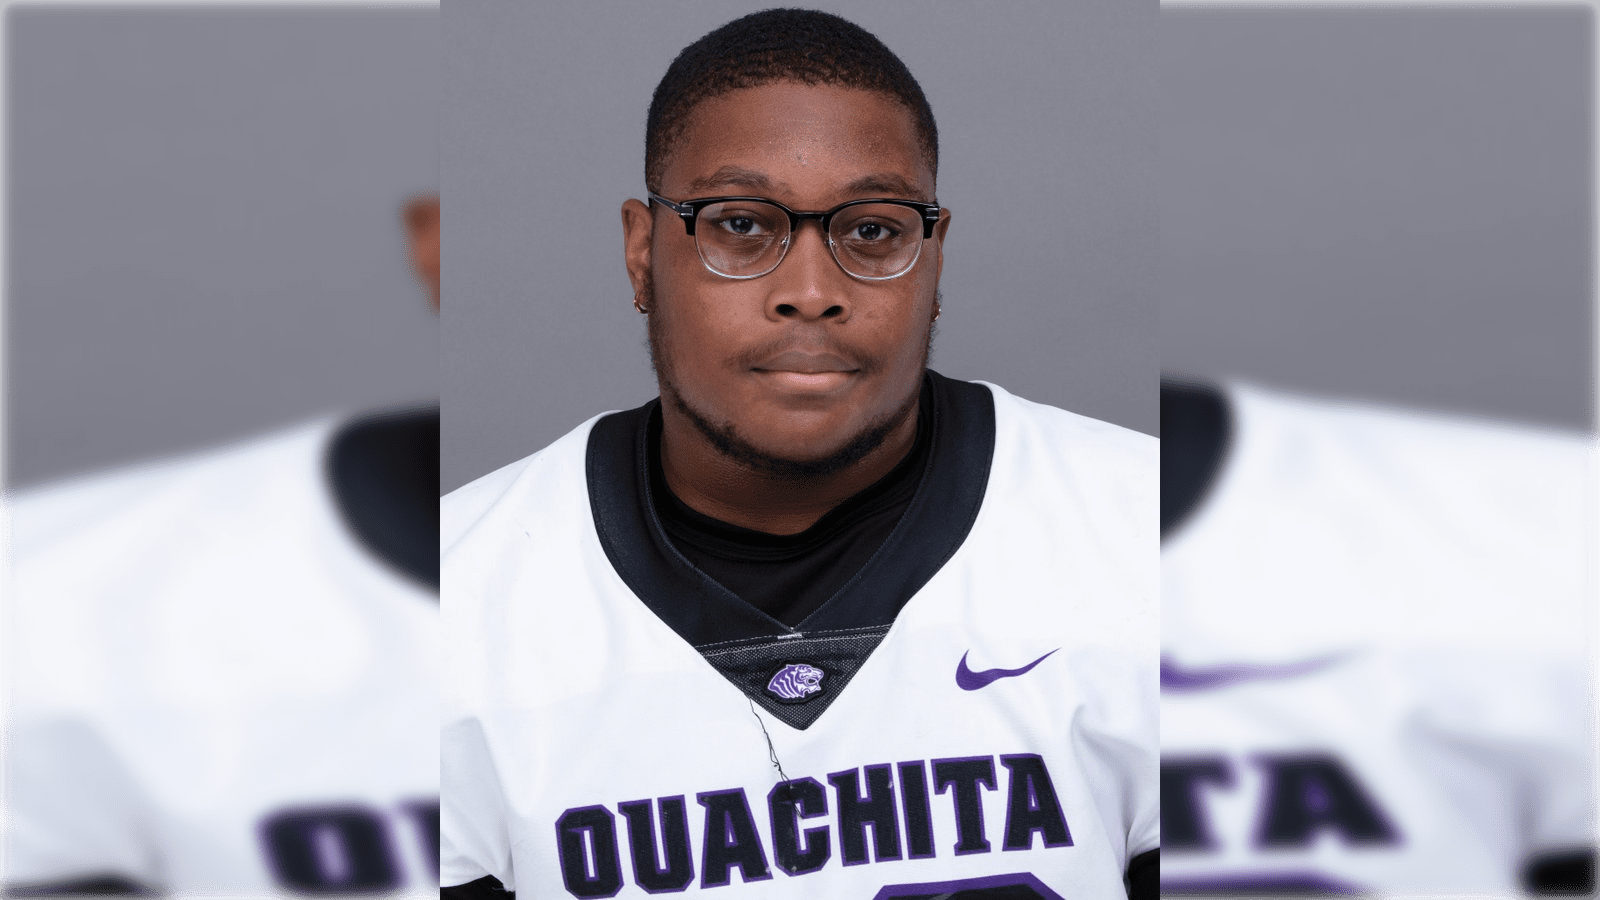 Ouachita Baptist University football standout Clark Yarbrough is dead at the age of 21 after collapsing